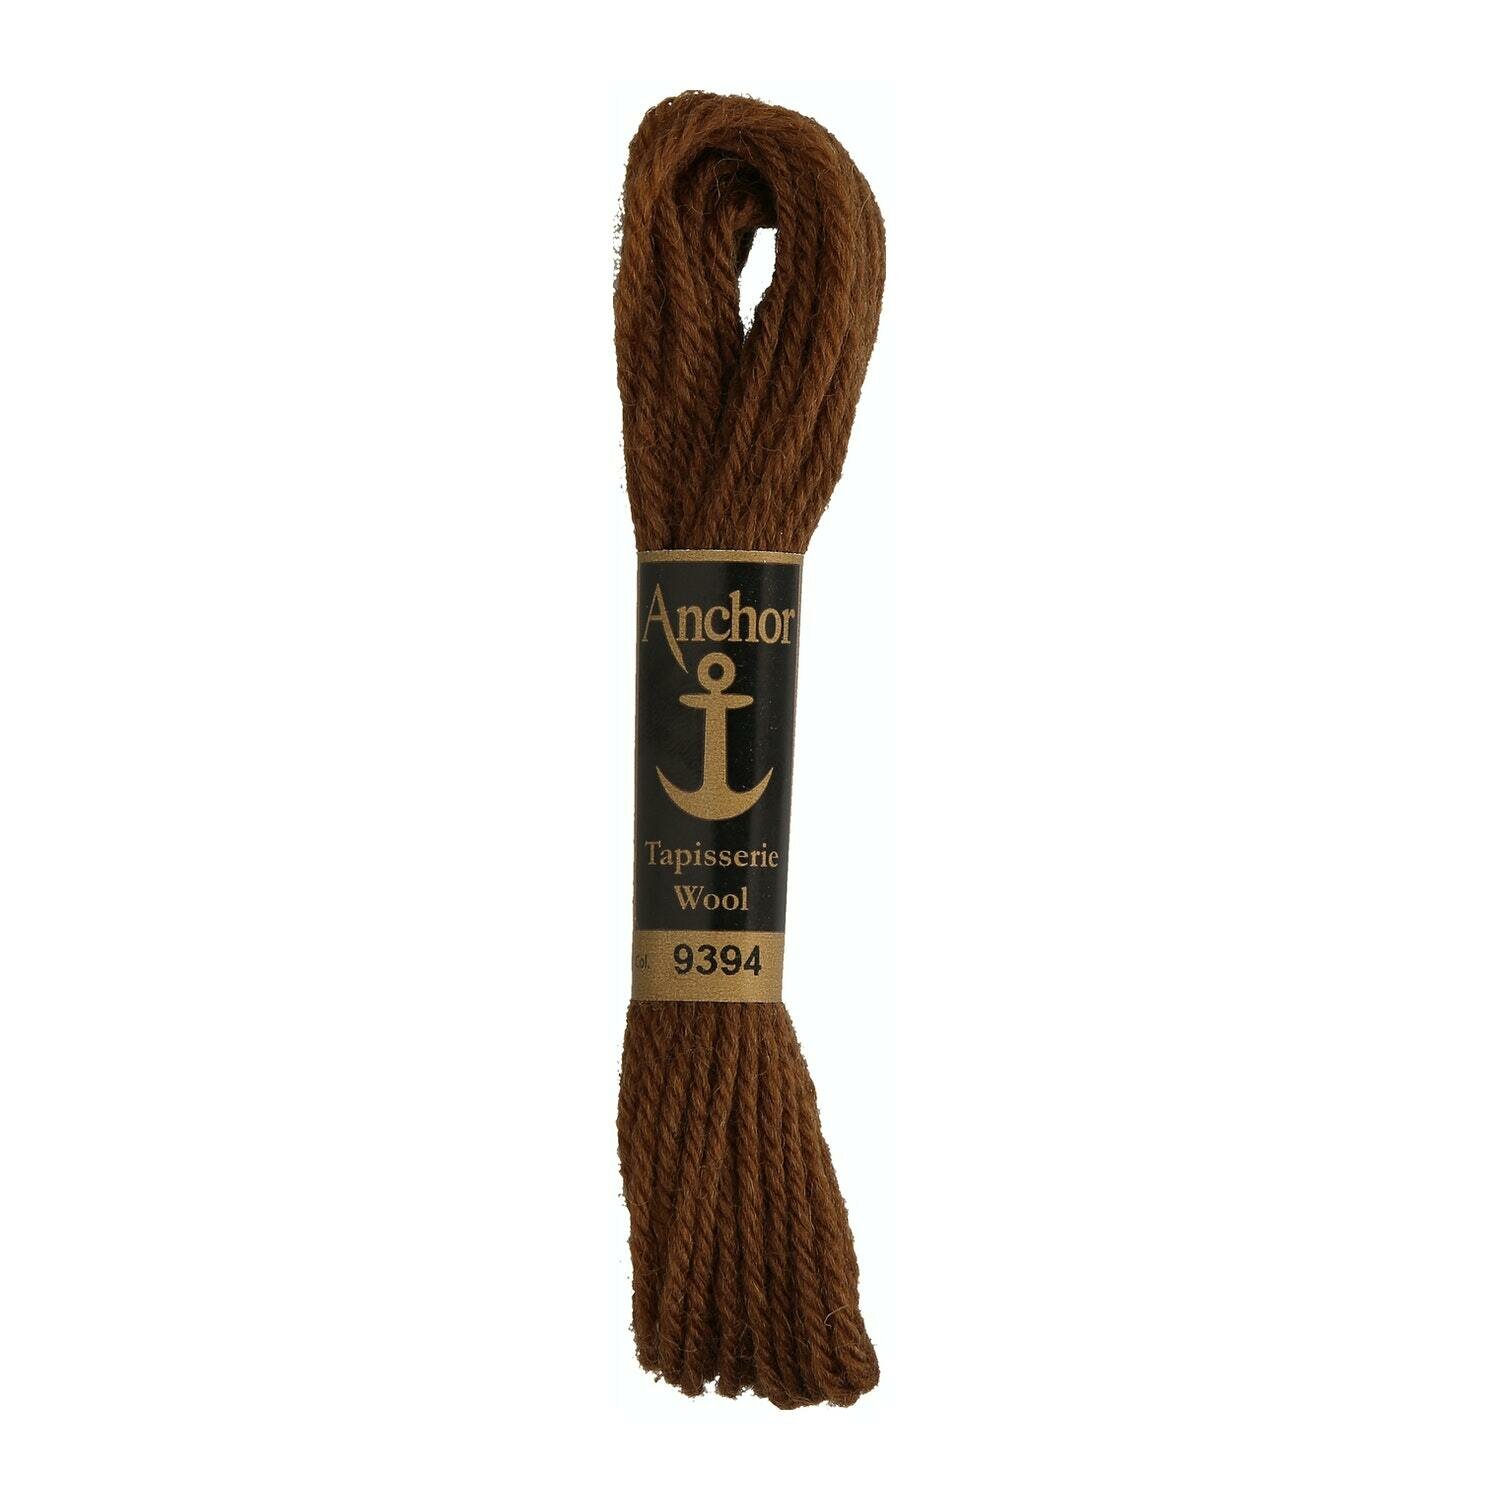 Anchor Tapisserie Wool # 09394